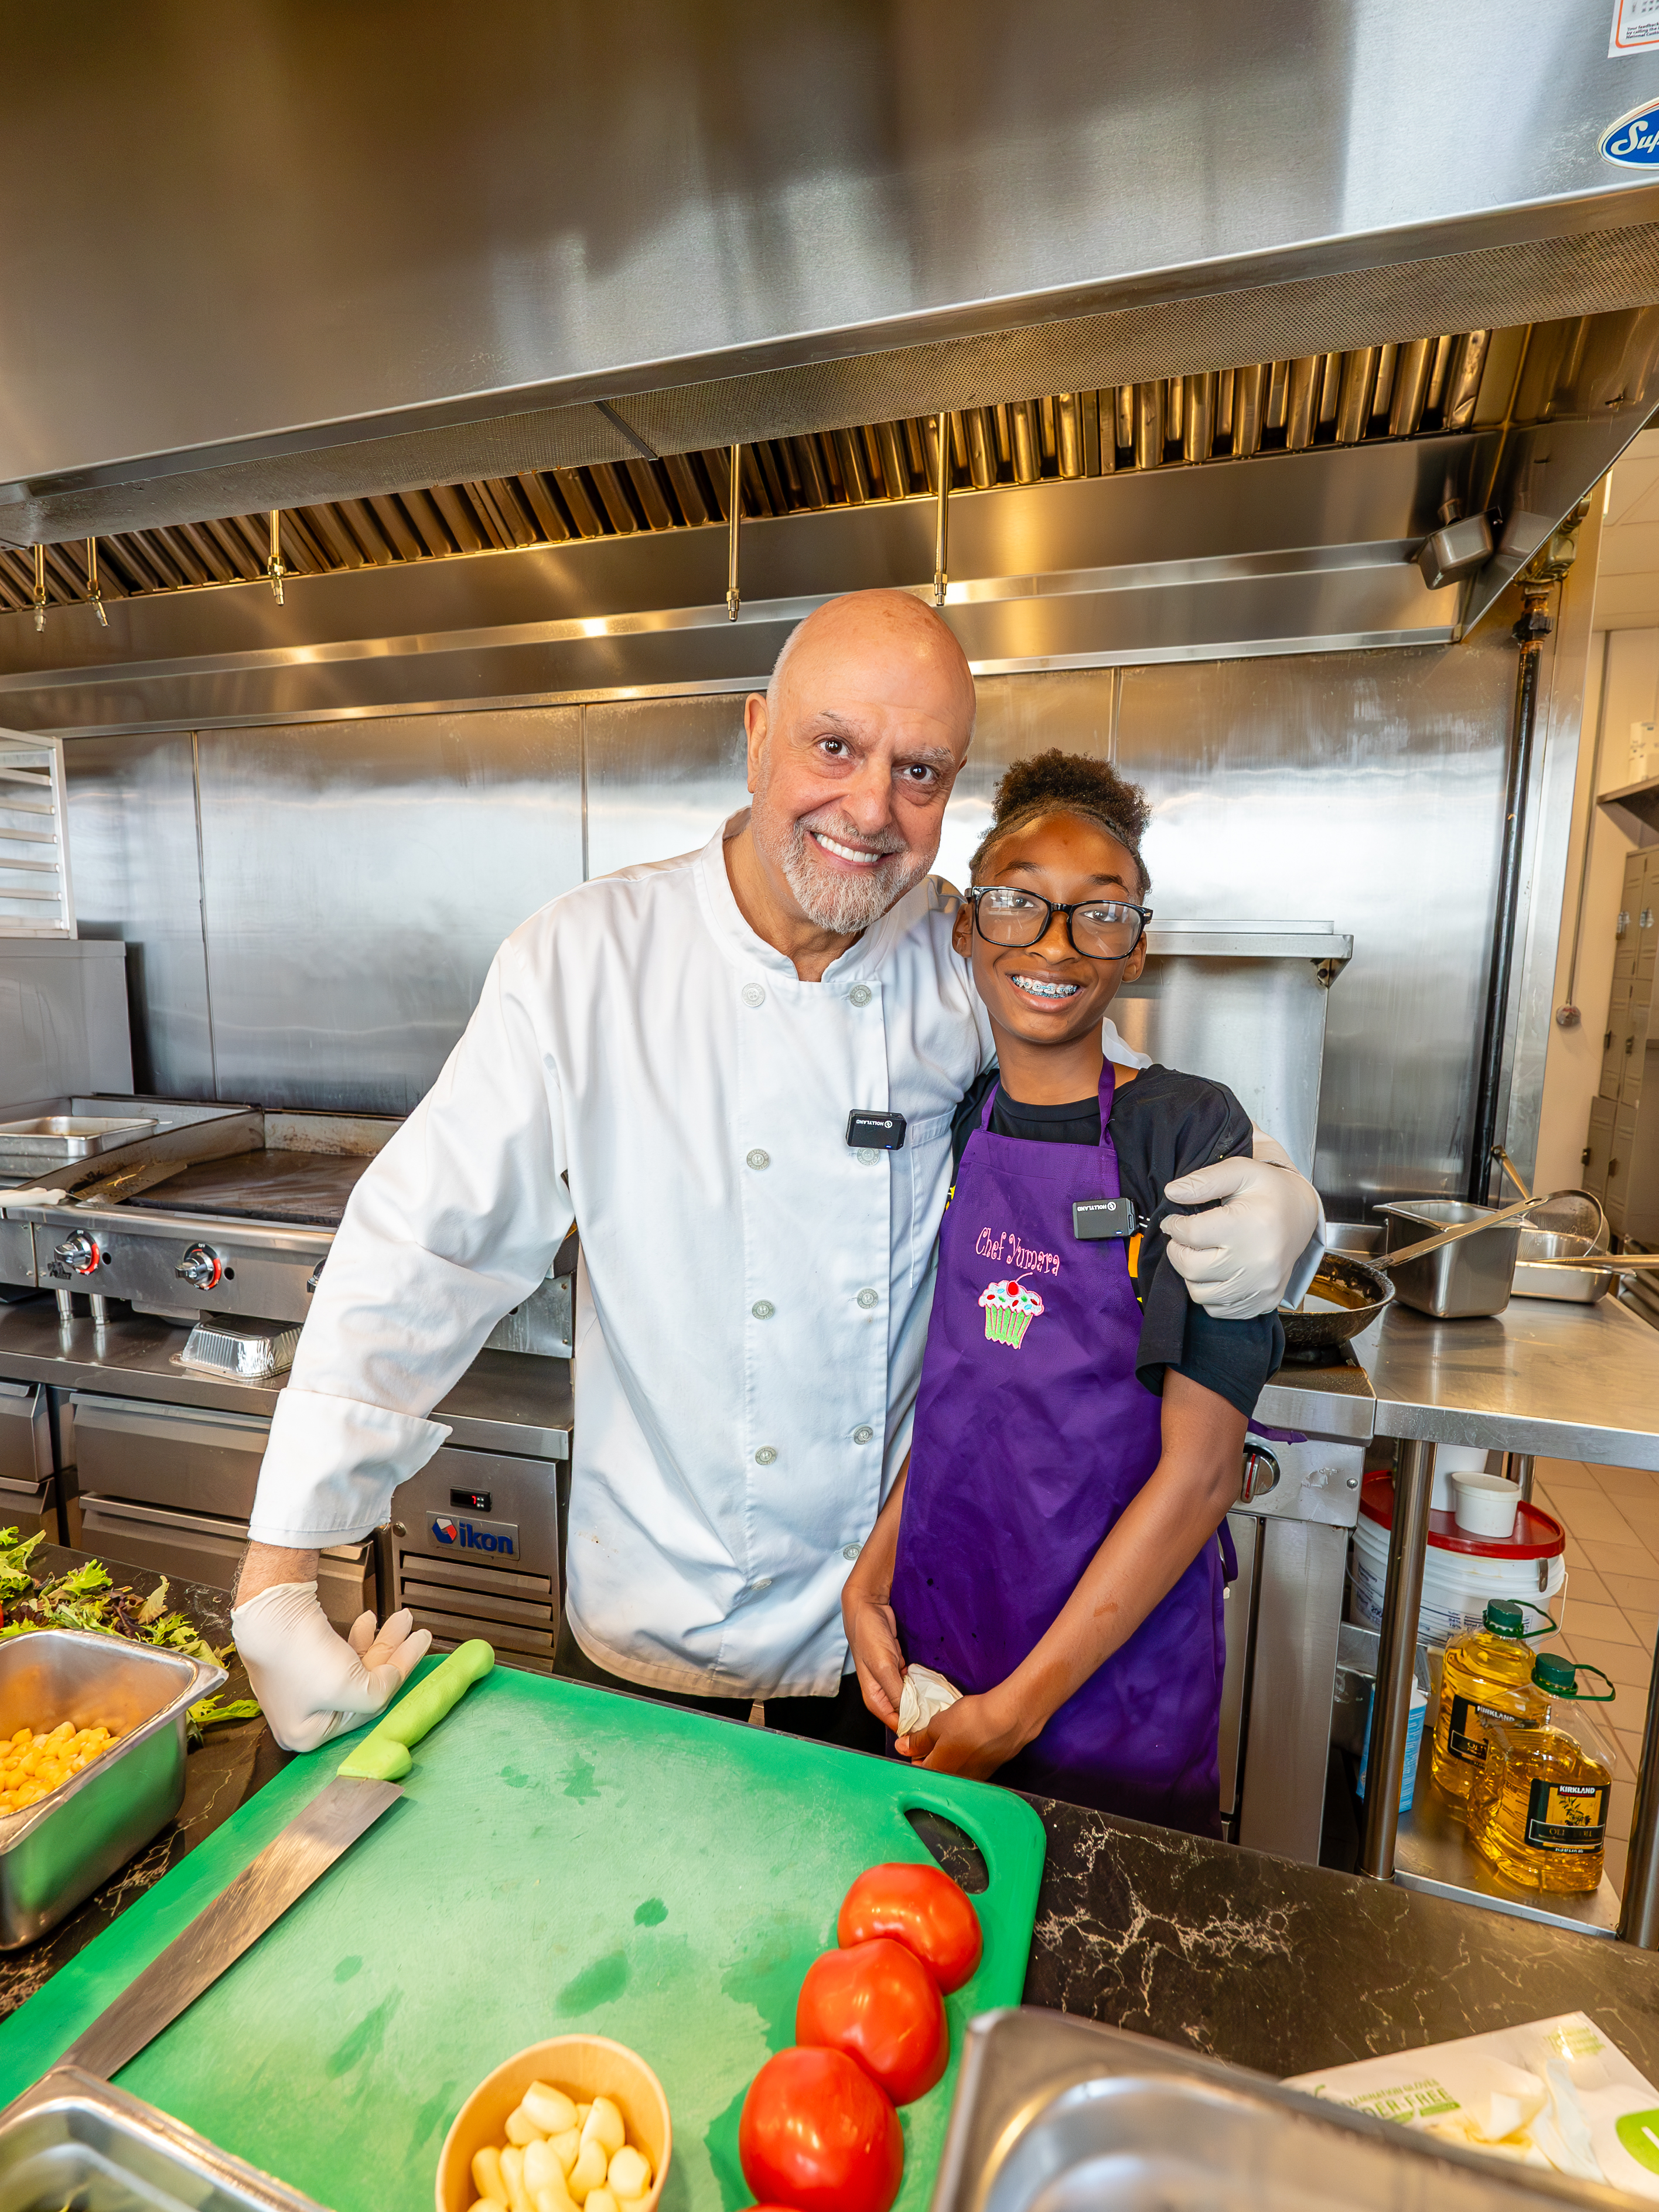 ajc.com - Olivia Wakim - How a food court shooting led a 12-year-old chef to Aviva by Kameel's kitchen